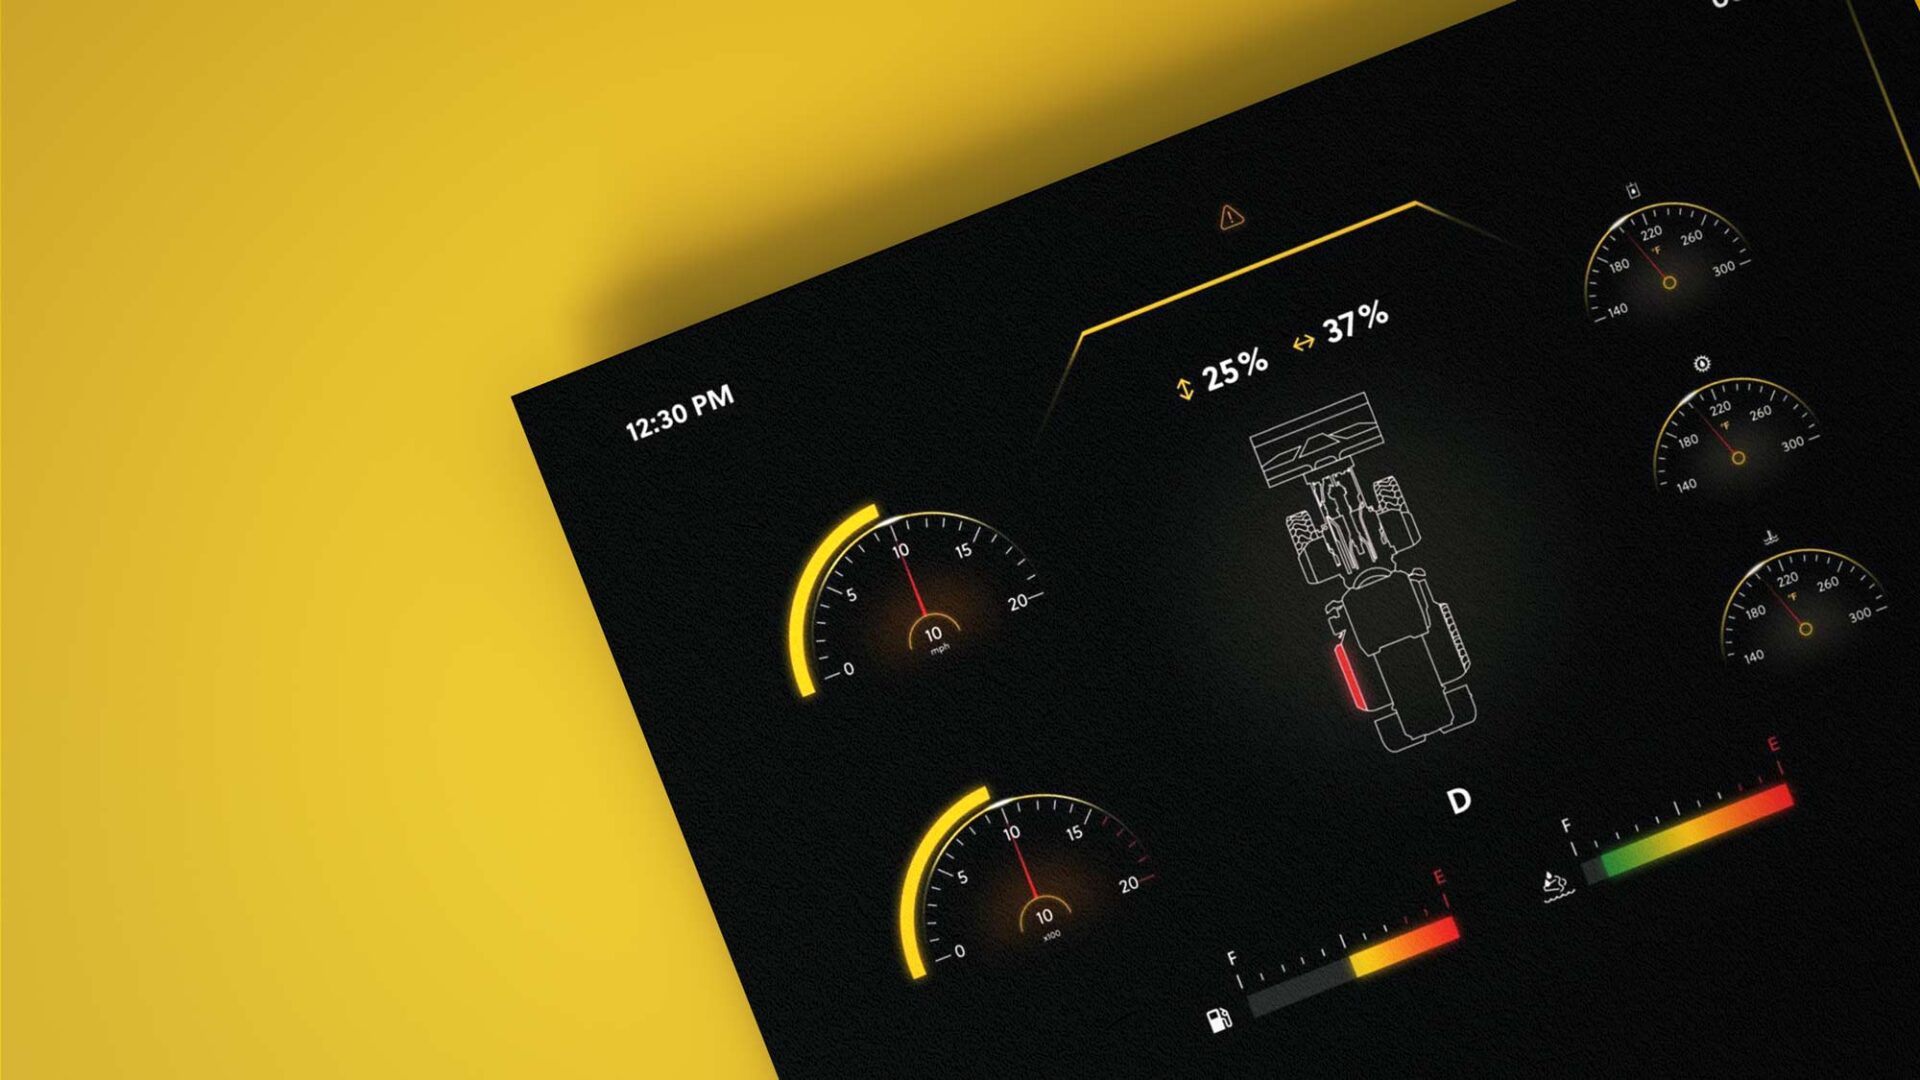 Automotive and machinery interface screen featuring graphic design components.